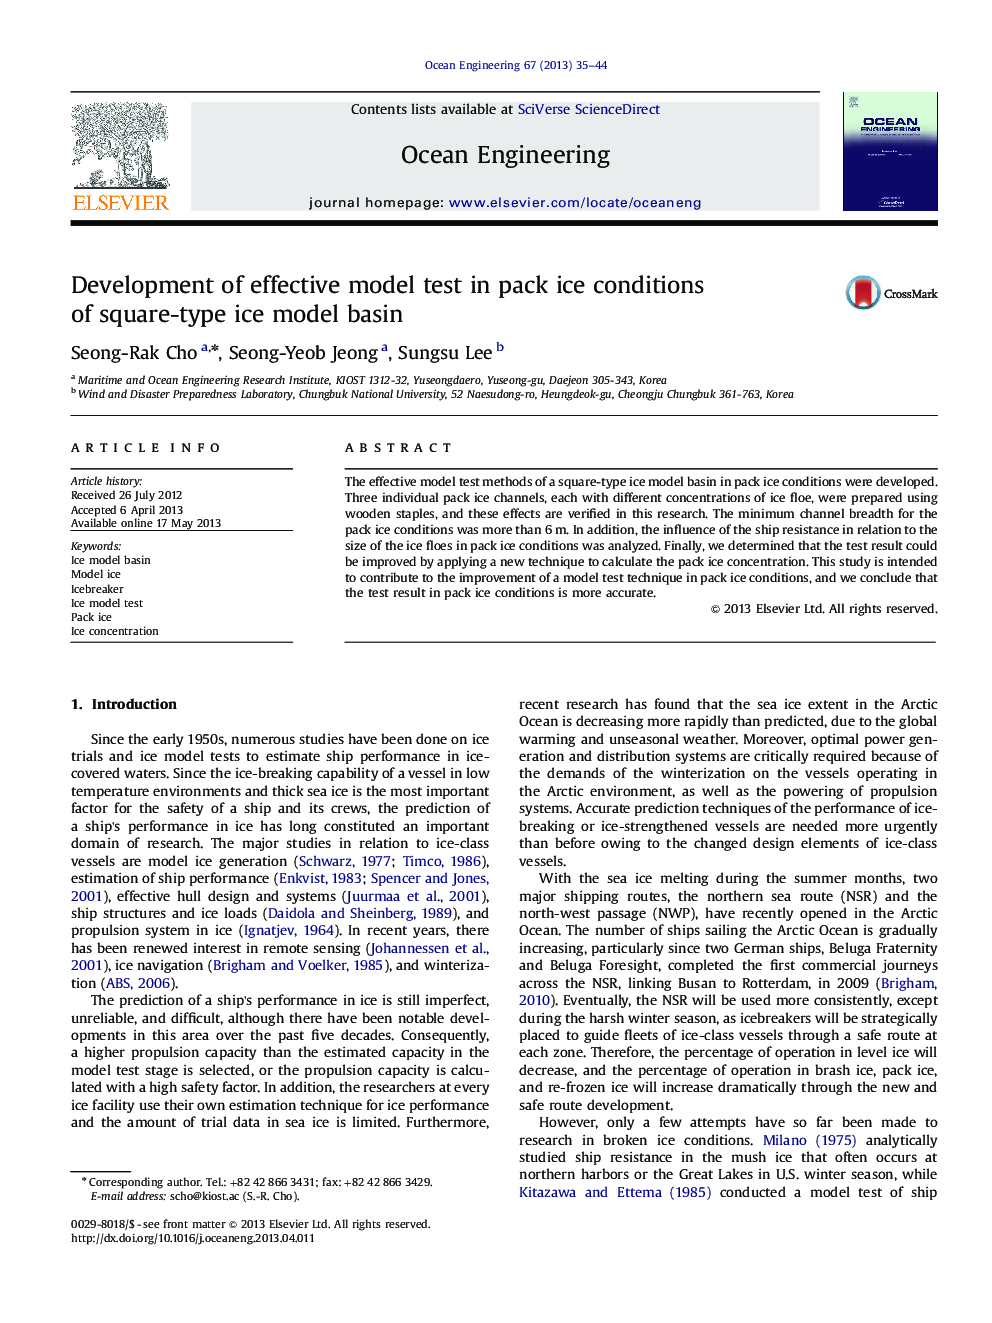 Development of effective model test in pack ice conditions of square-type ice model basin